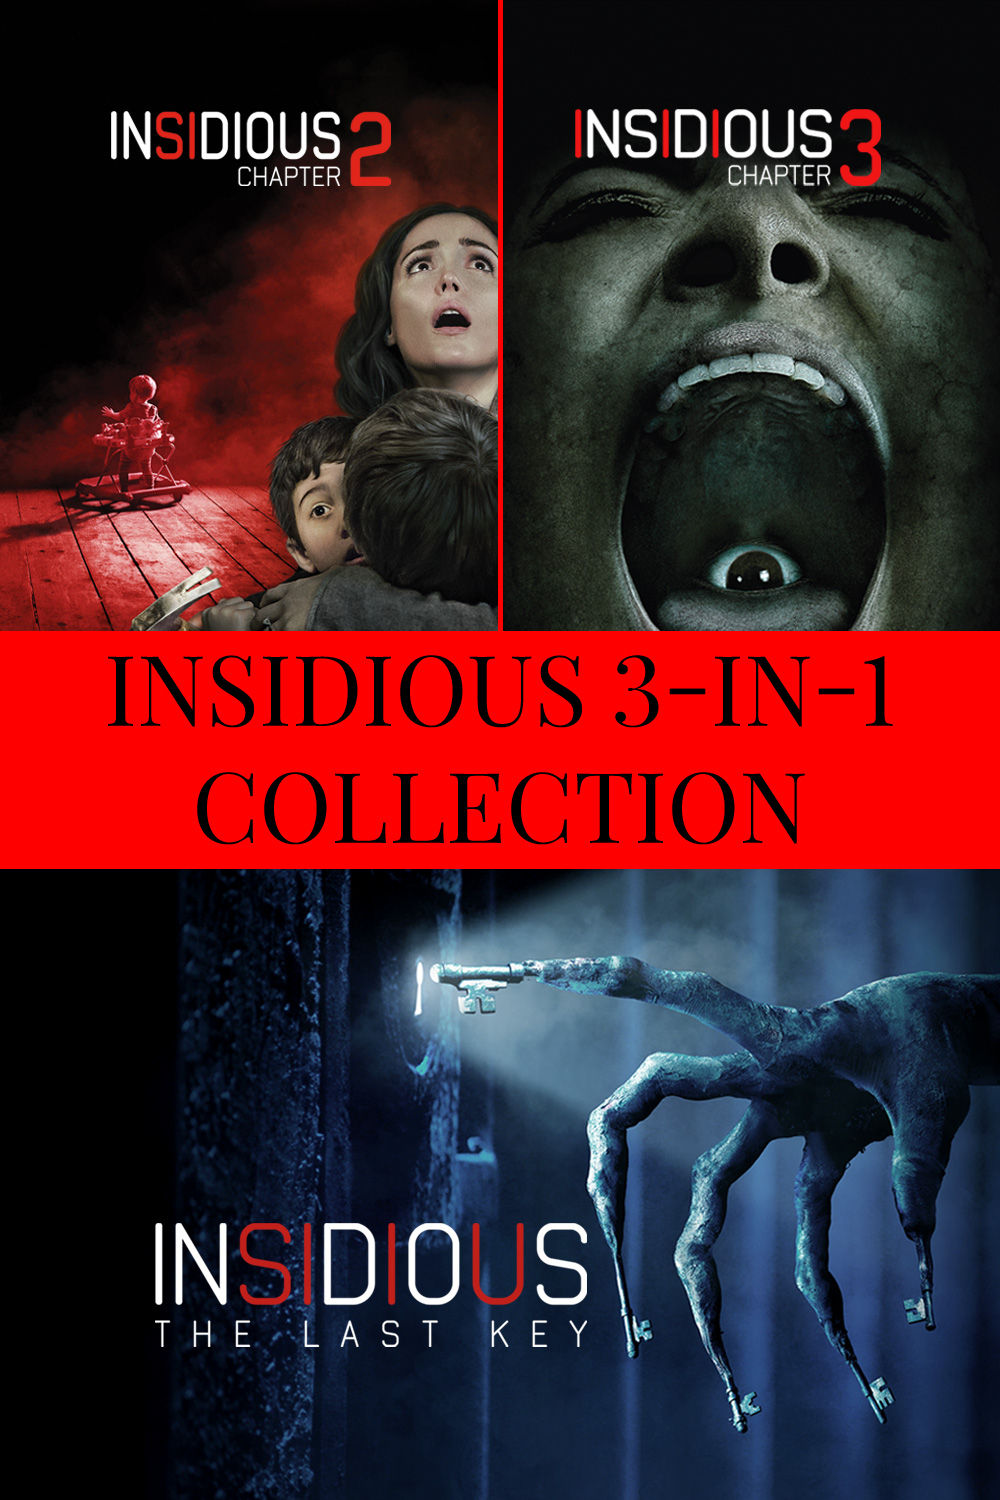 Watch The Insidious Movie Series Online